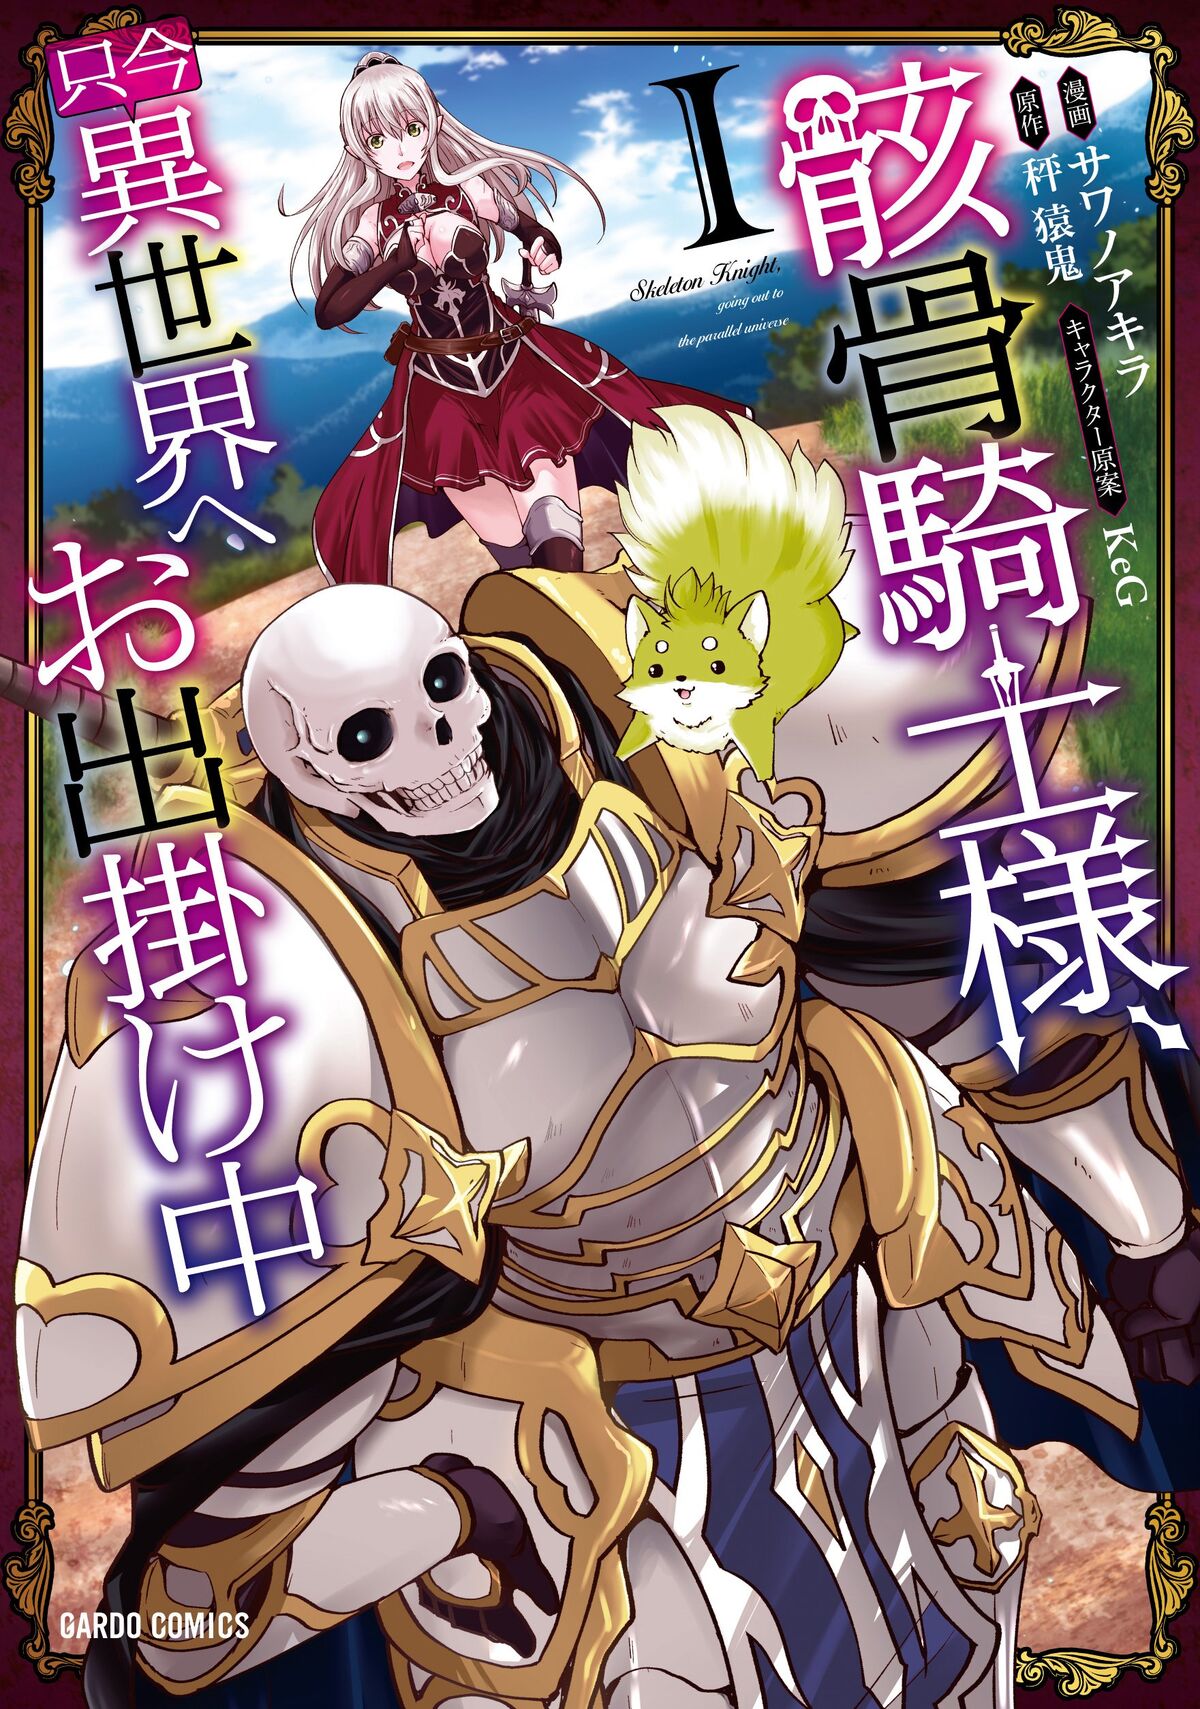 Skeleton Knight in Another World 12 – Japanese Book Store